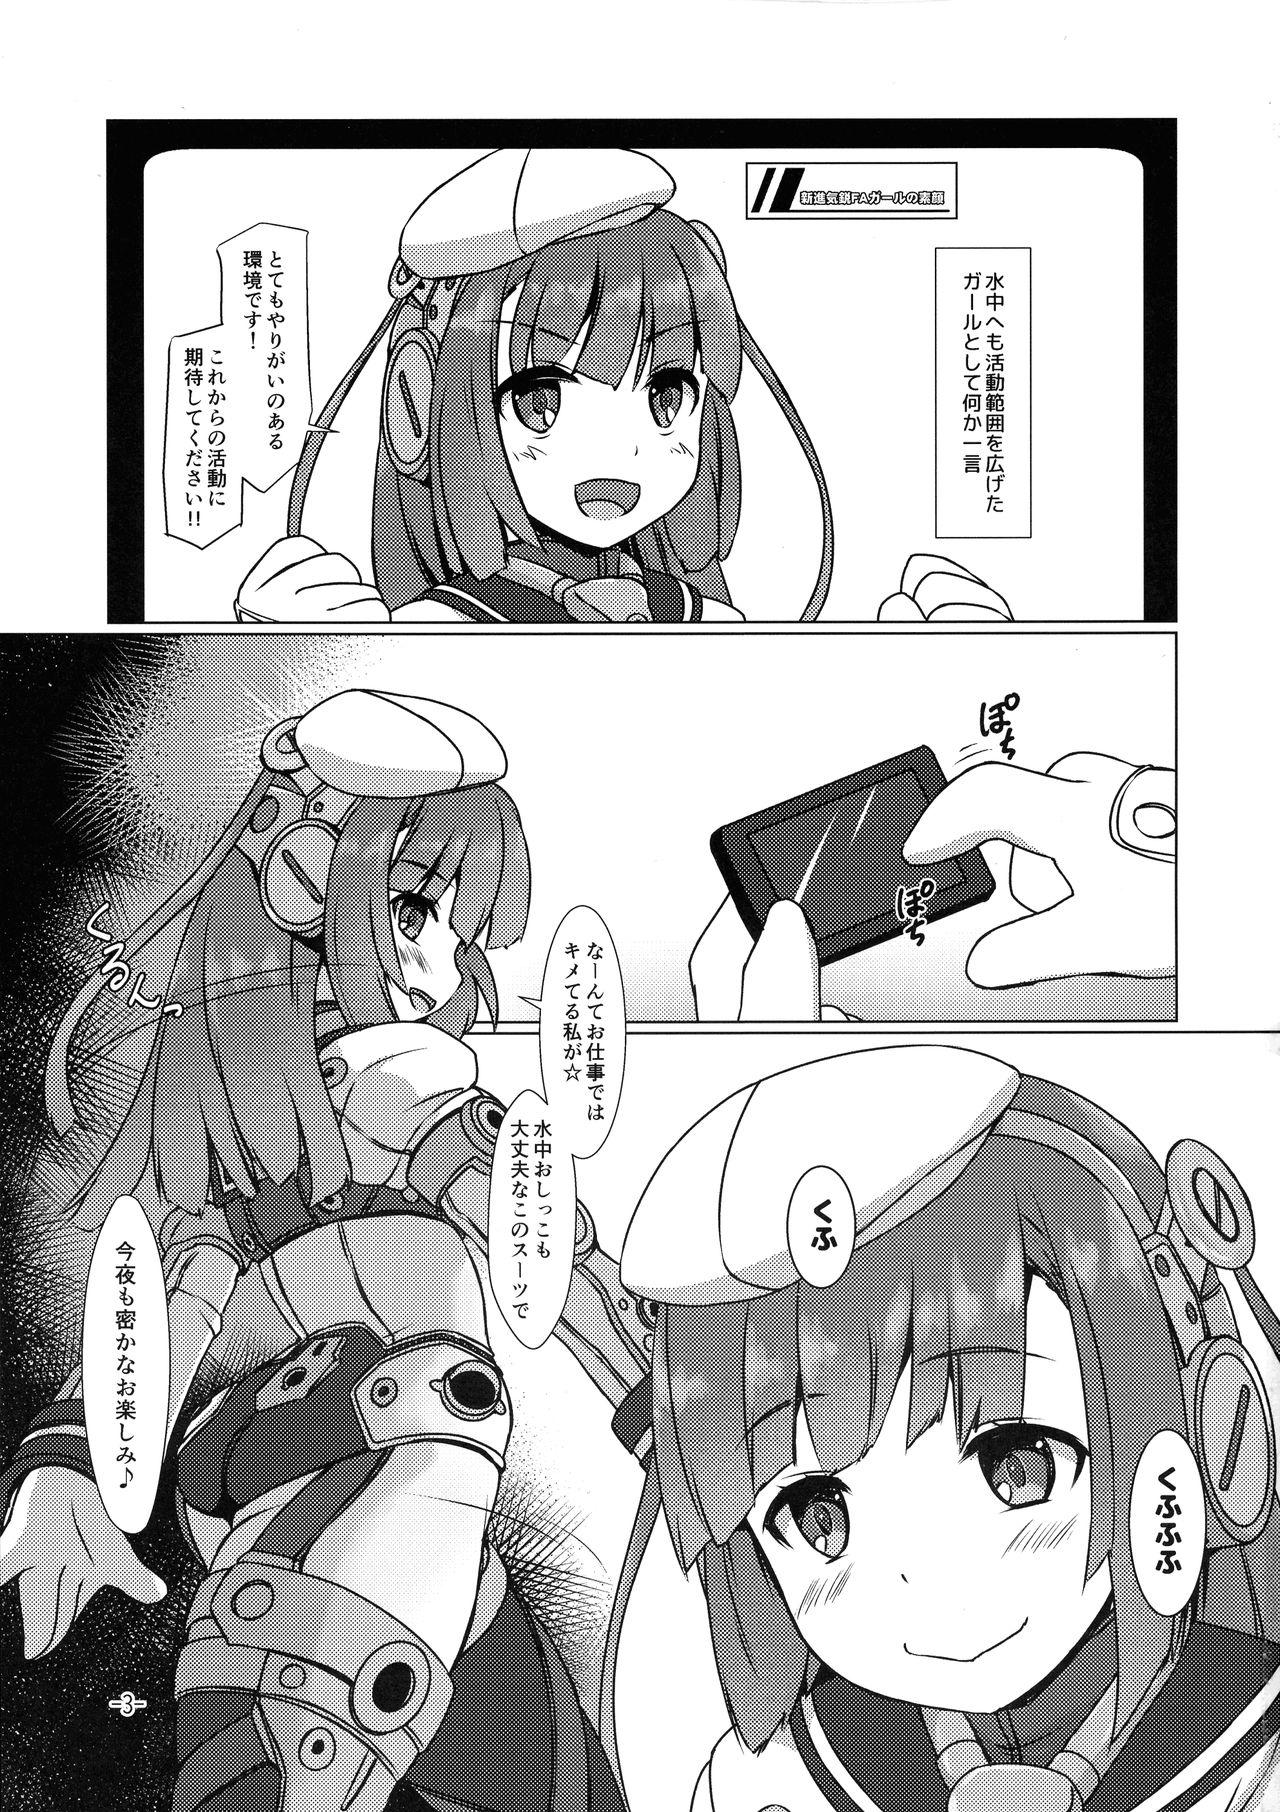 Cojiendo FUNNY ANDROGYNE GIRLS 4 - Frame arms girl Viet - Page 2